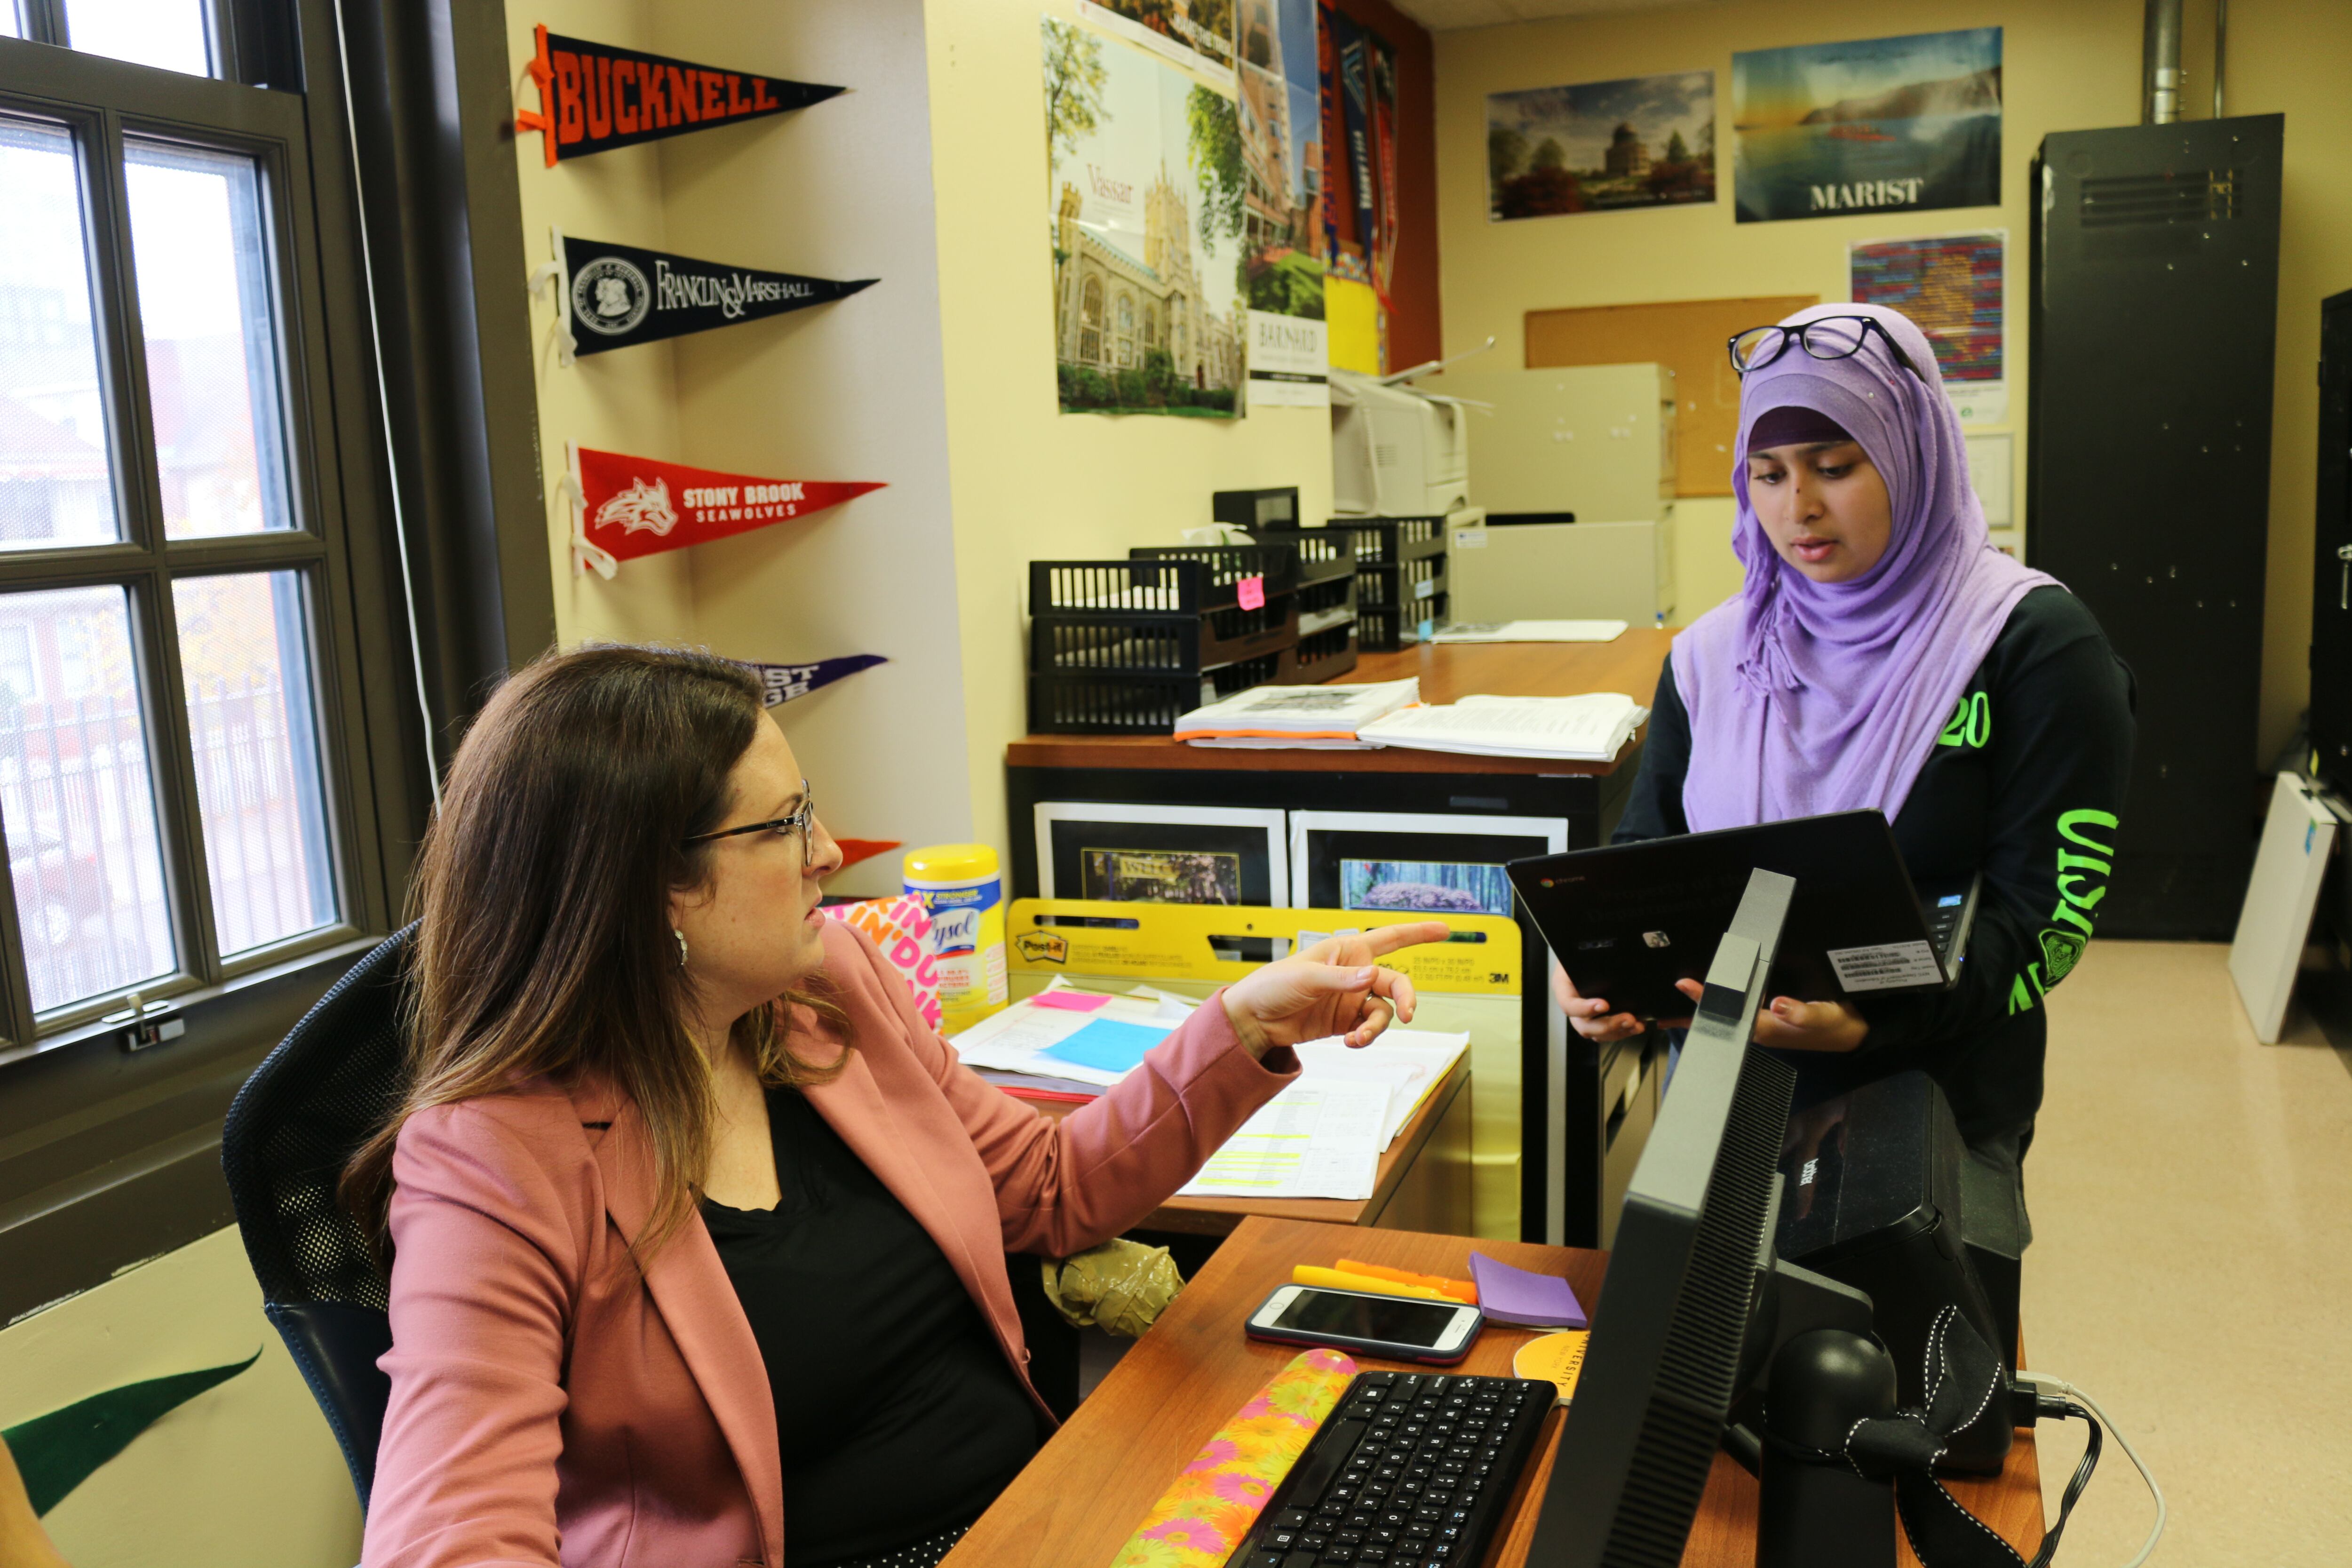 A woman wearing a light pink jacket sits at a desk while a student wearing a purple hijab stands next to the desk holding a laptop. The two are talking and there are college banners and posters on the wall in the background.